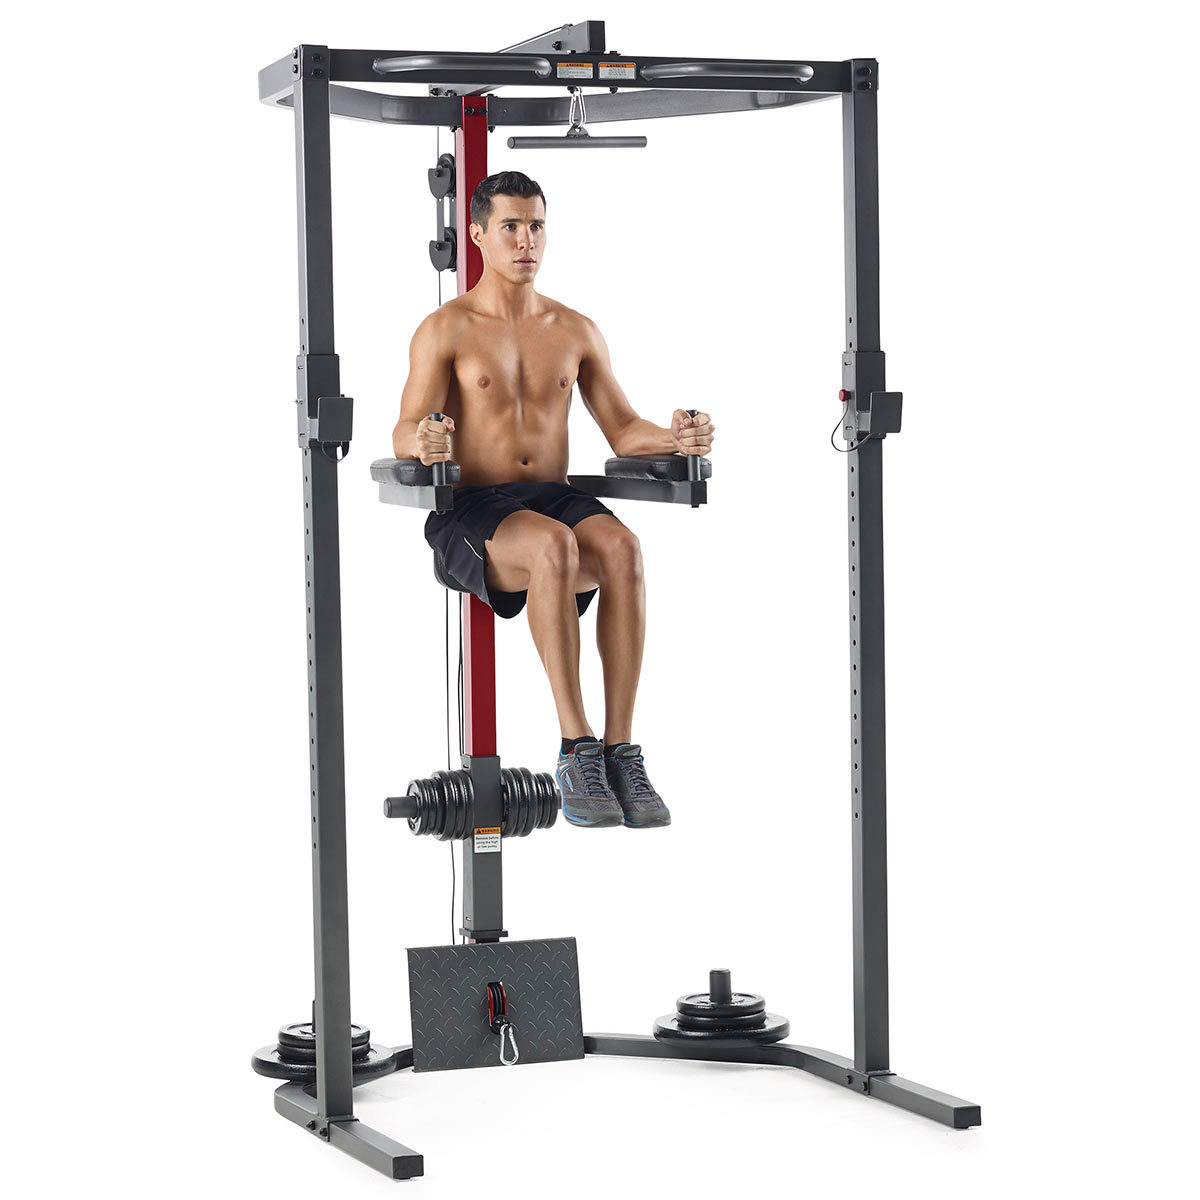 Weider Power Rack with ProForm 7 in 1 Training system